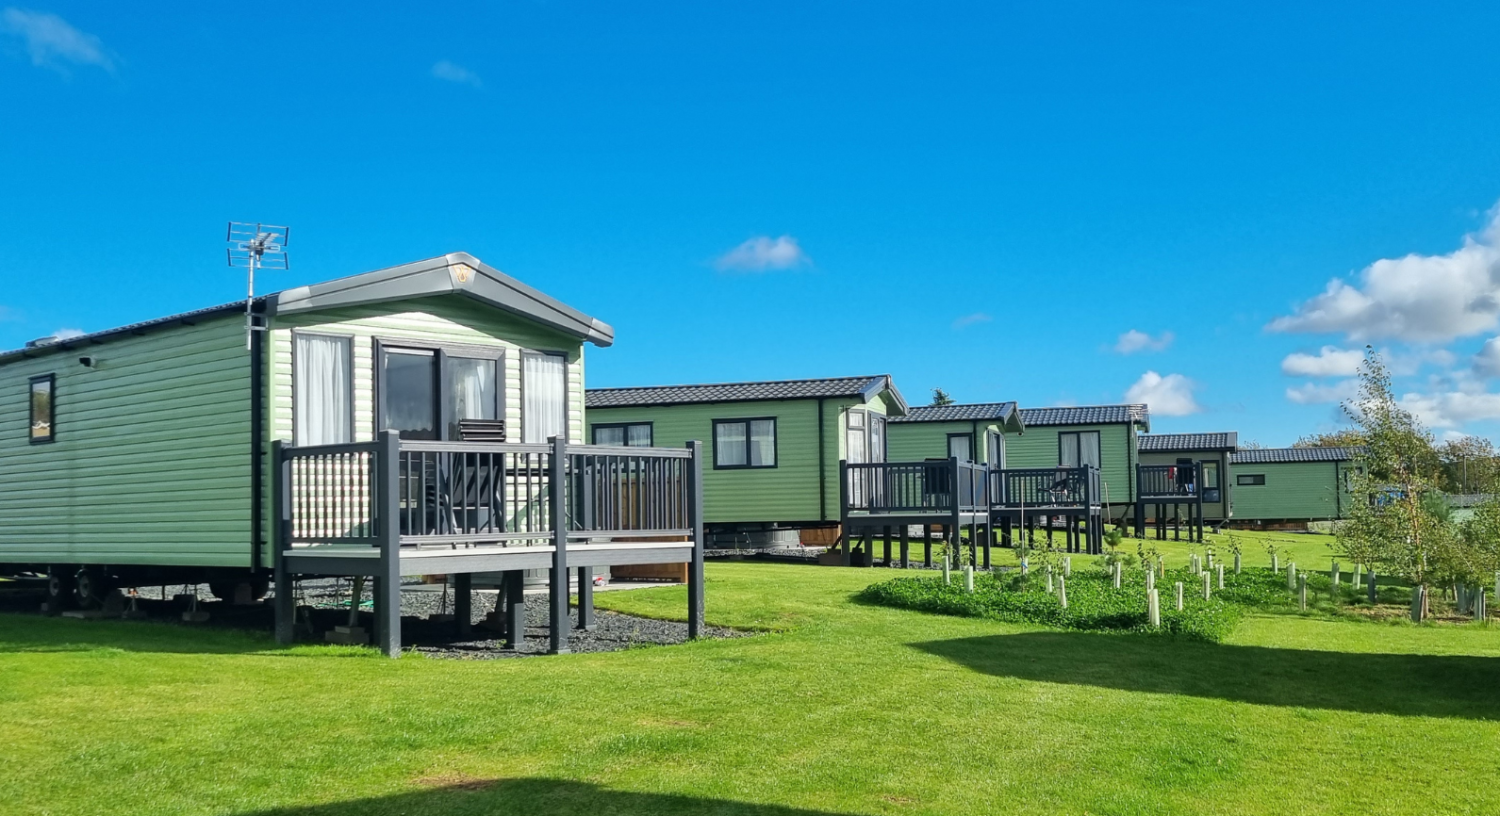 Coldstream holiday park news - Holiday Home Finance Now Available